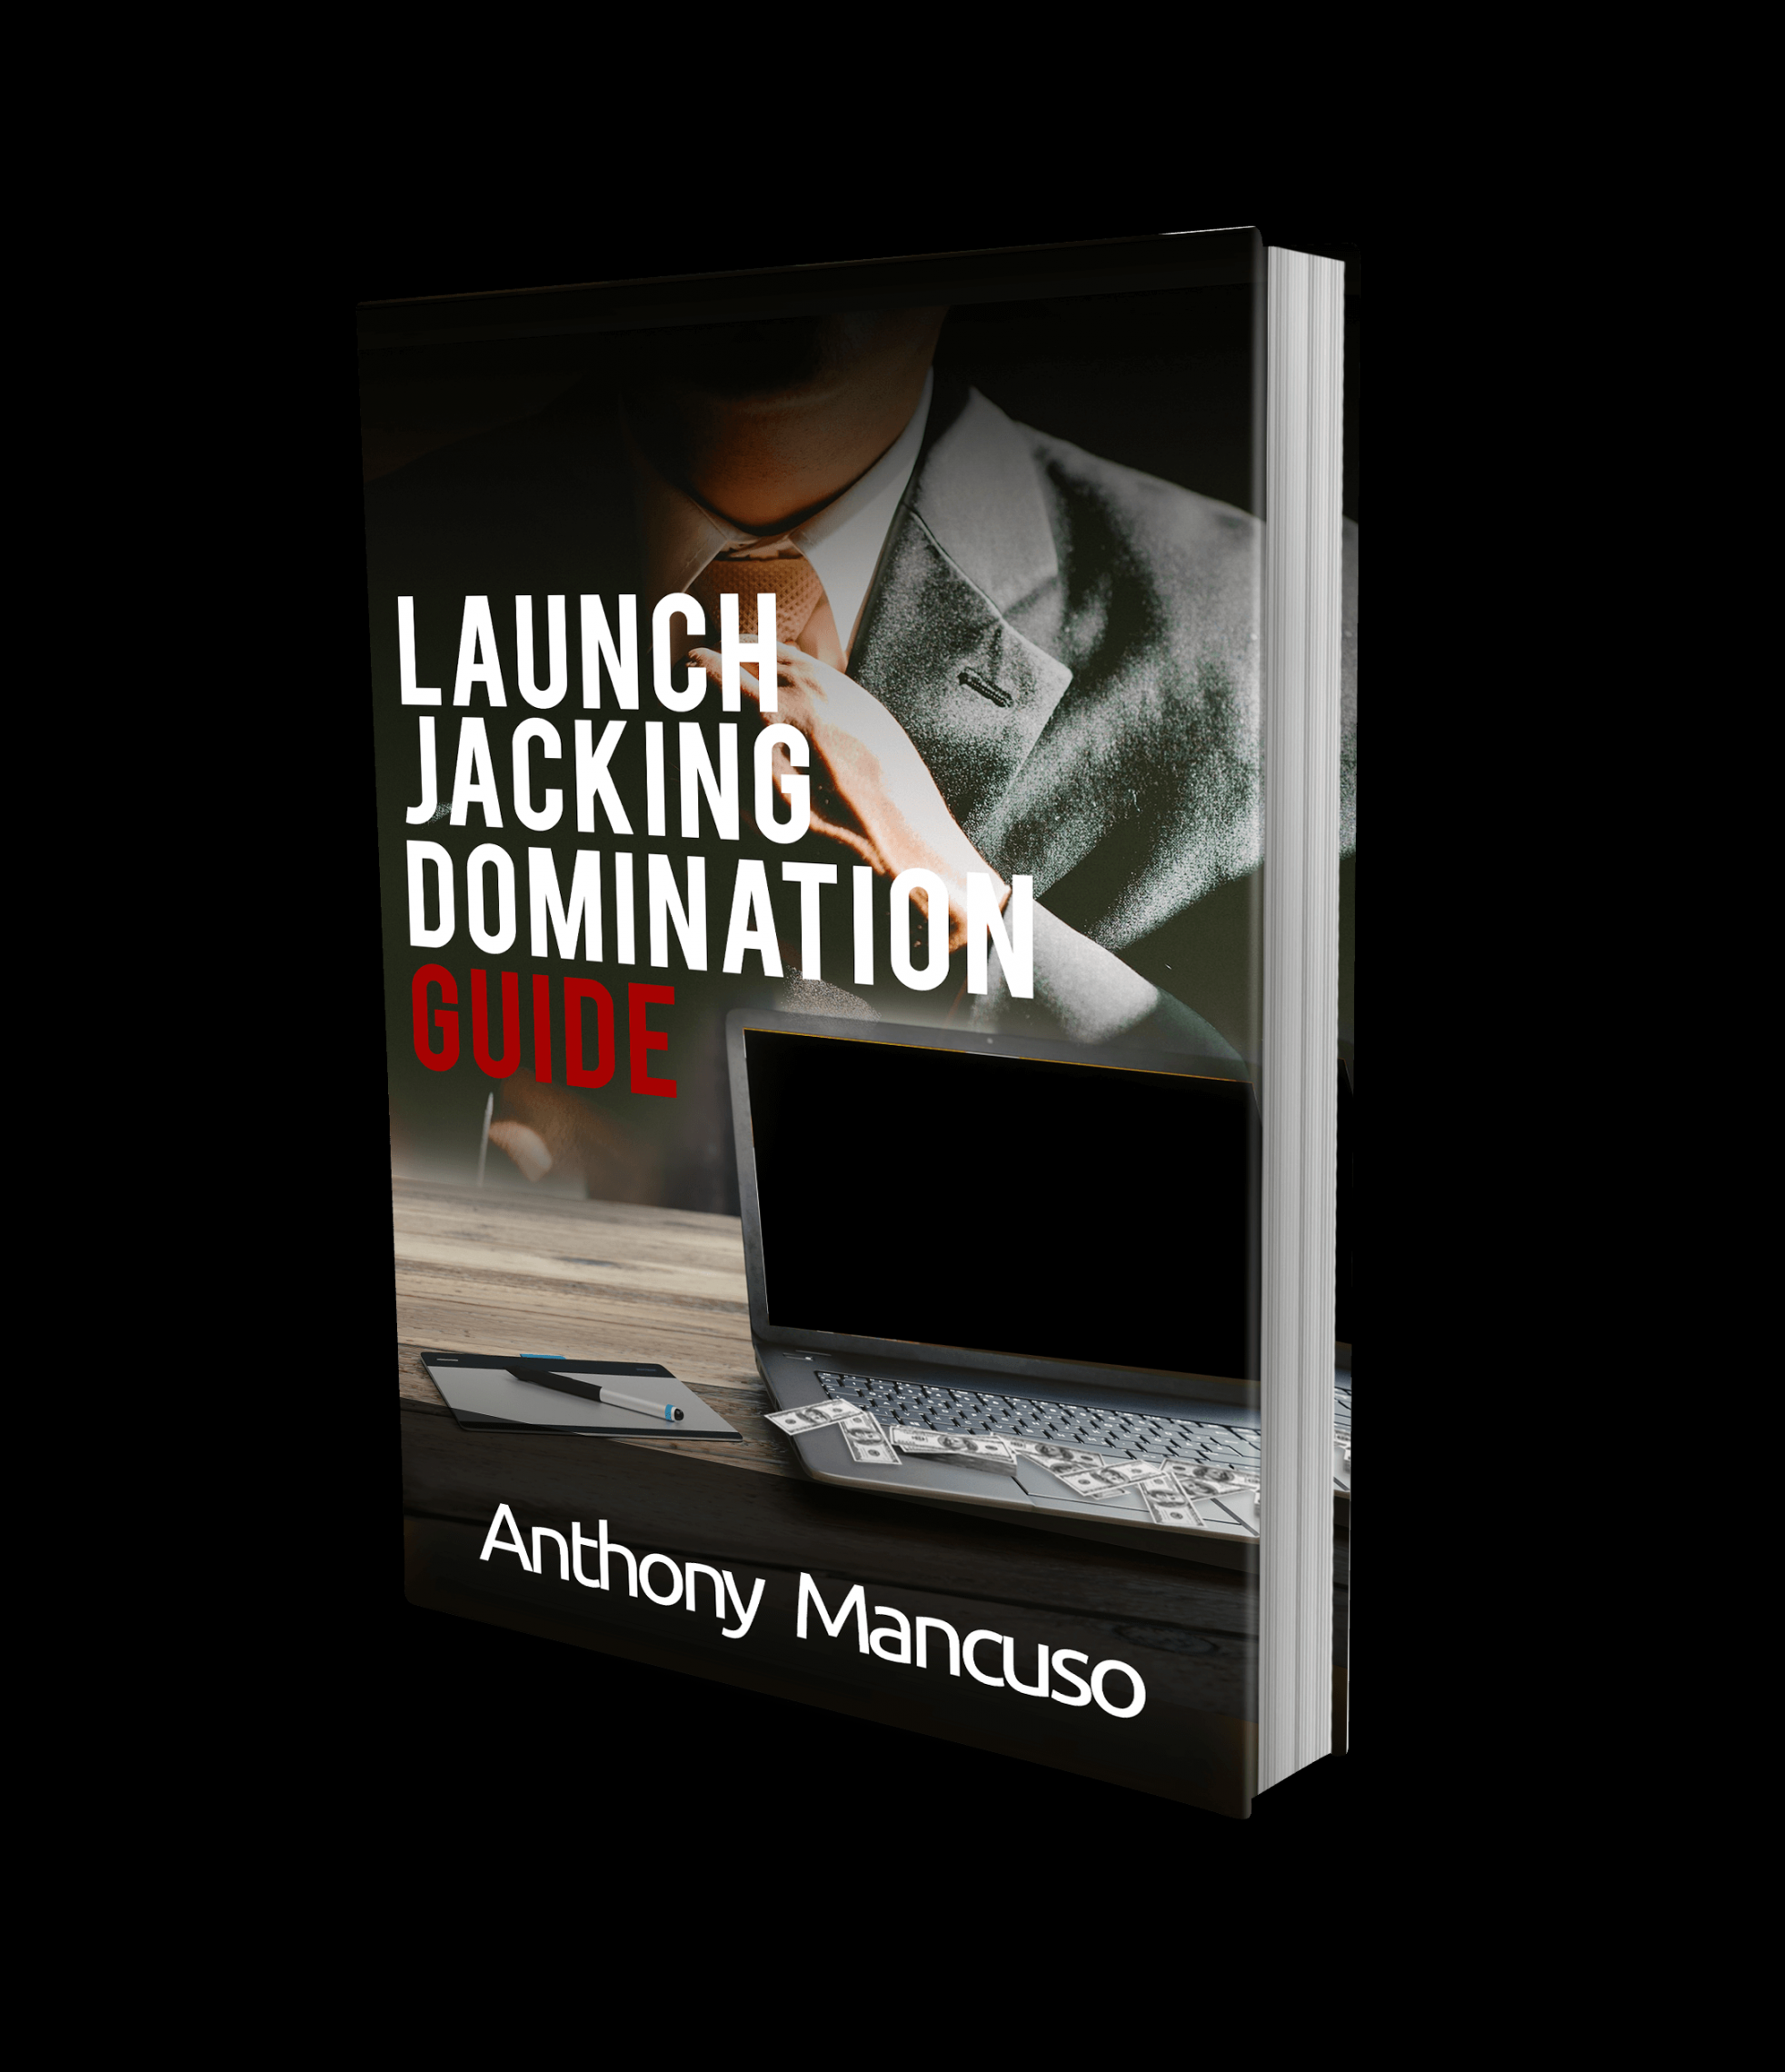 How to make an extra ,000 – ,000 a month using my tried and proven launch jacking methods.（Launch Jacking Domination）